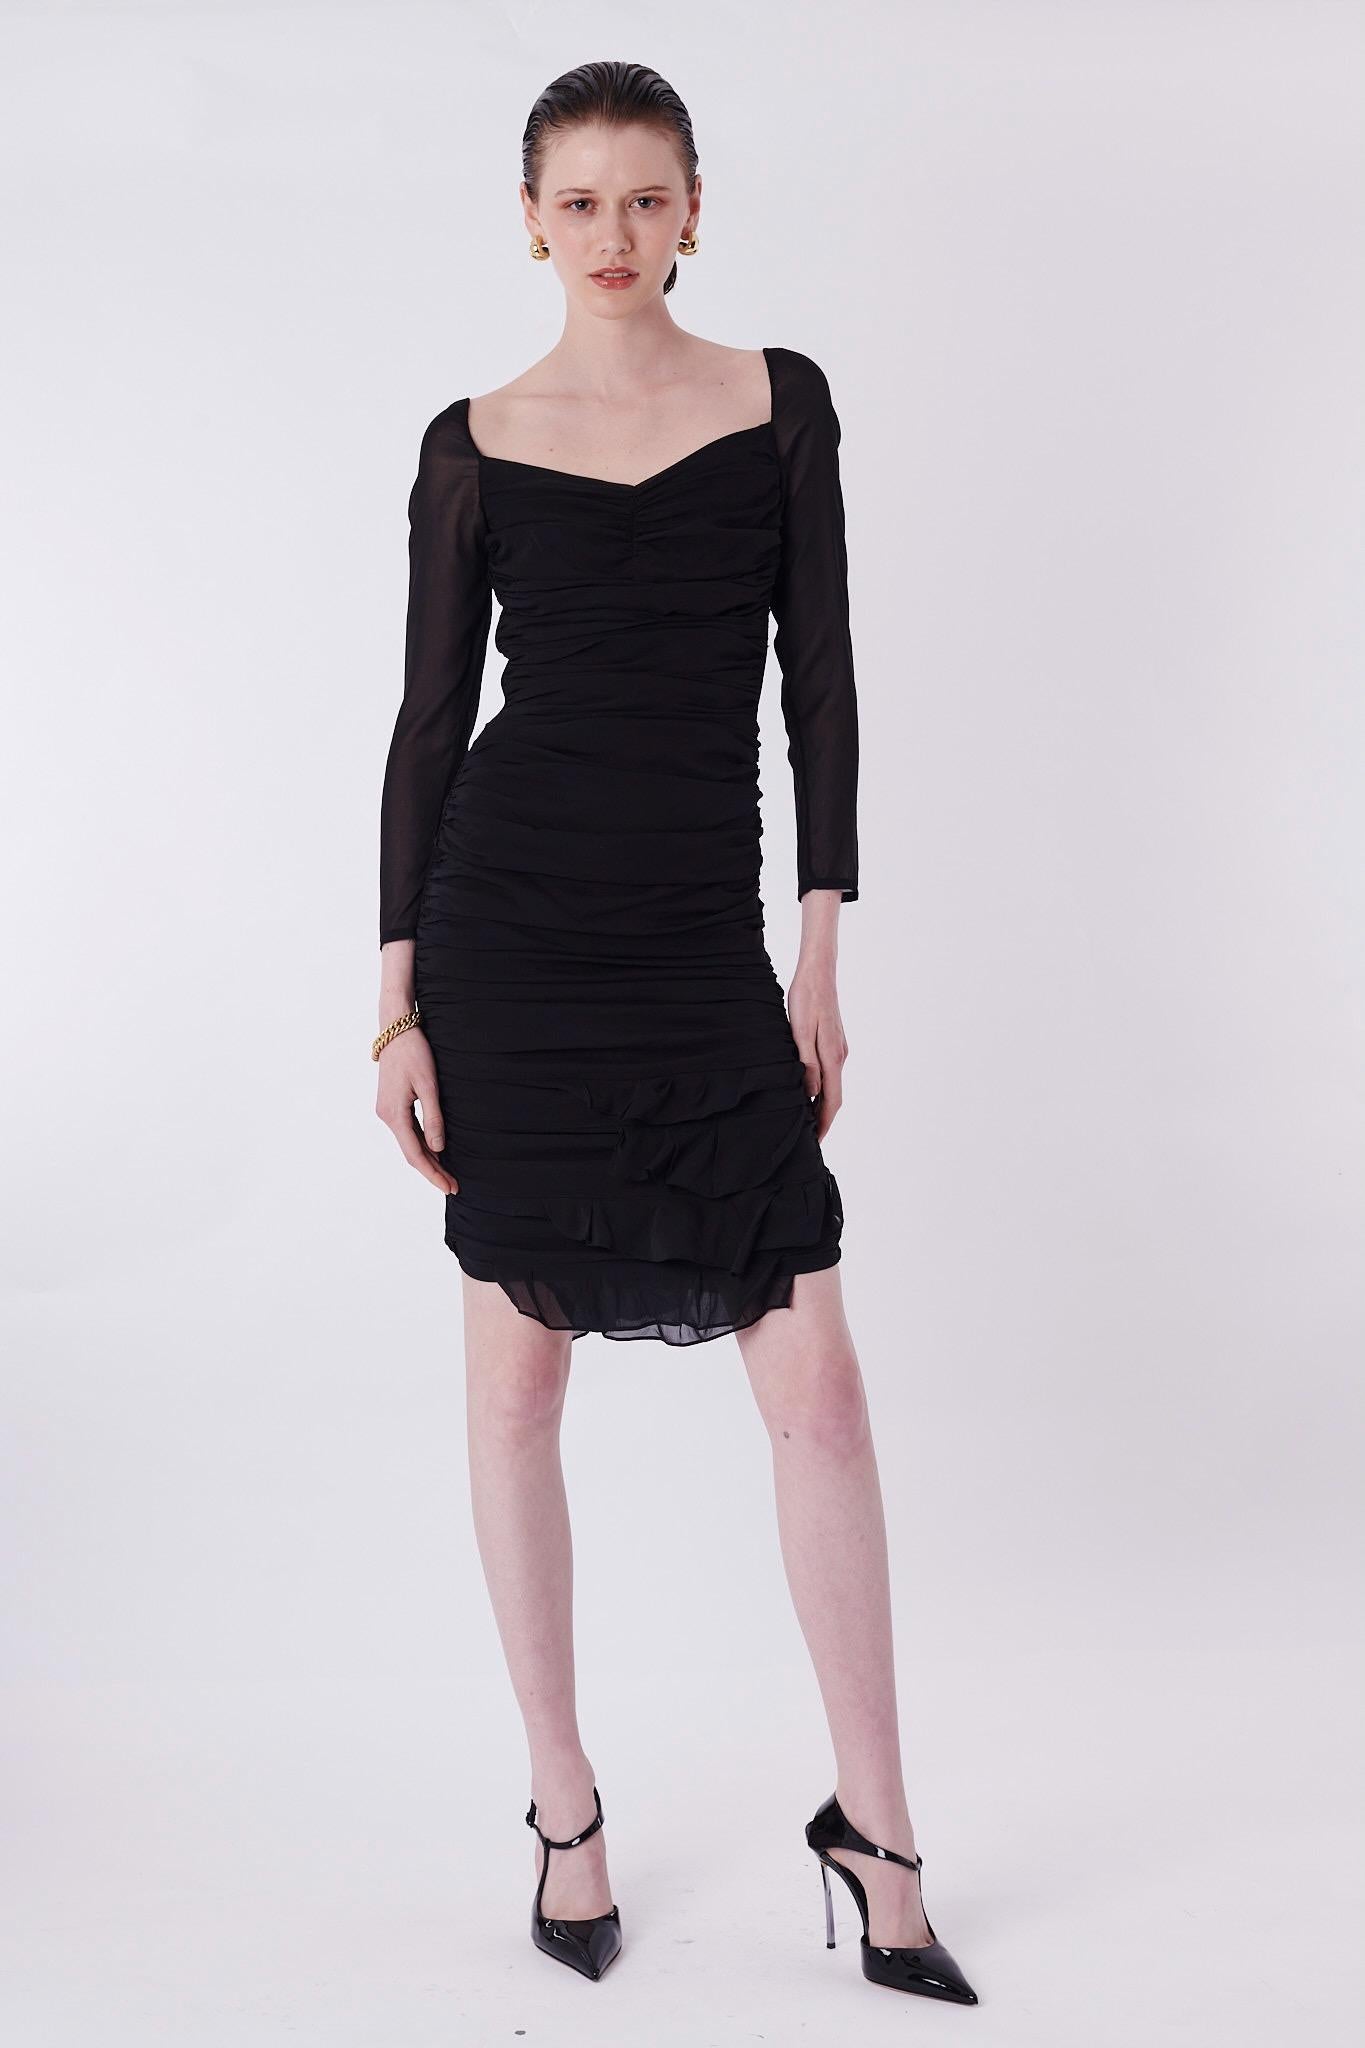 S/S 2003 Ruched Black Mini Dress In Excellent Condition For Sale In London, GB